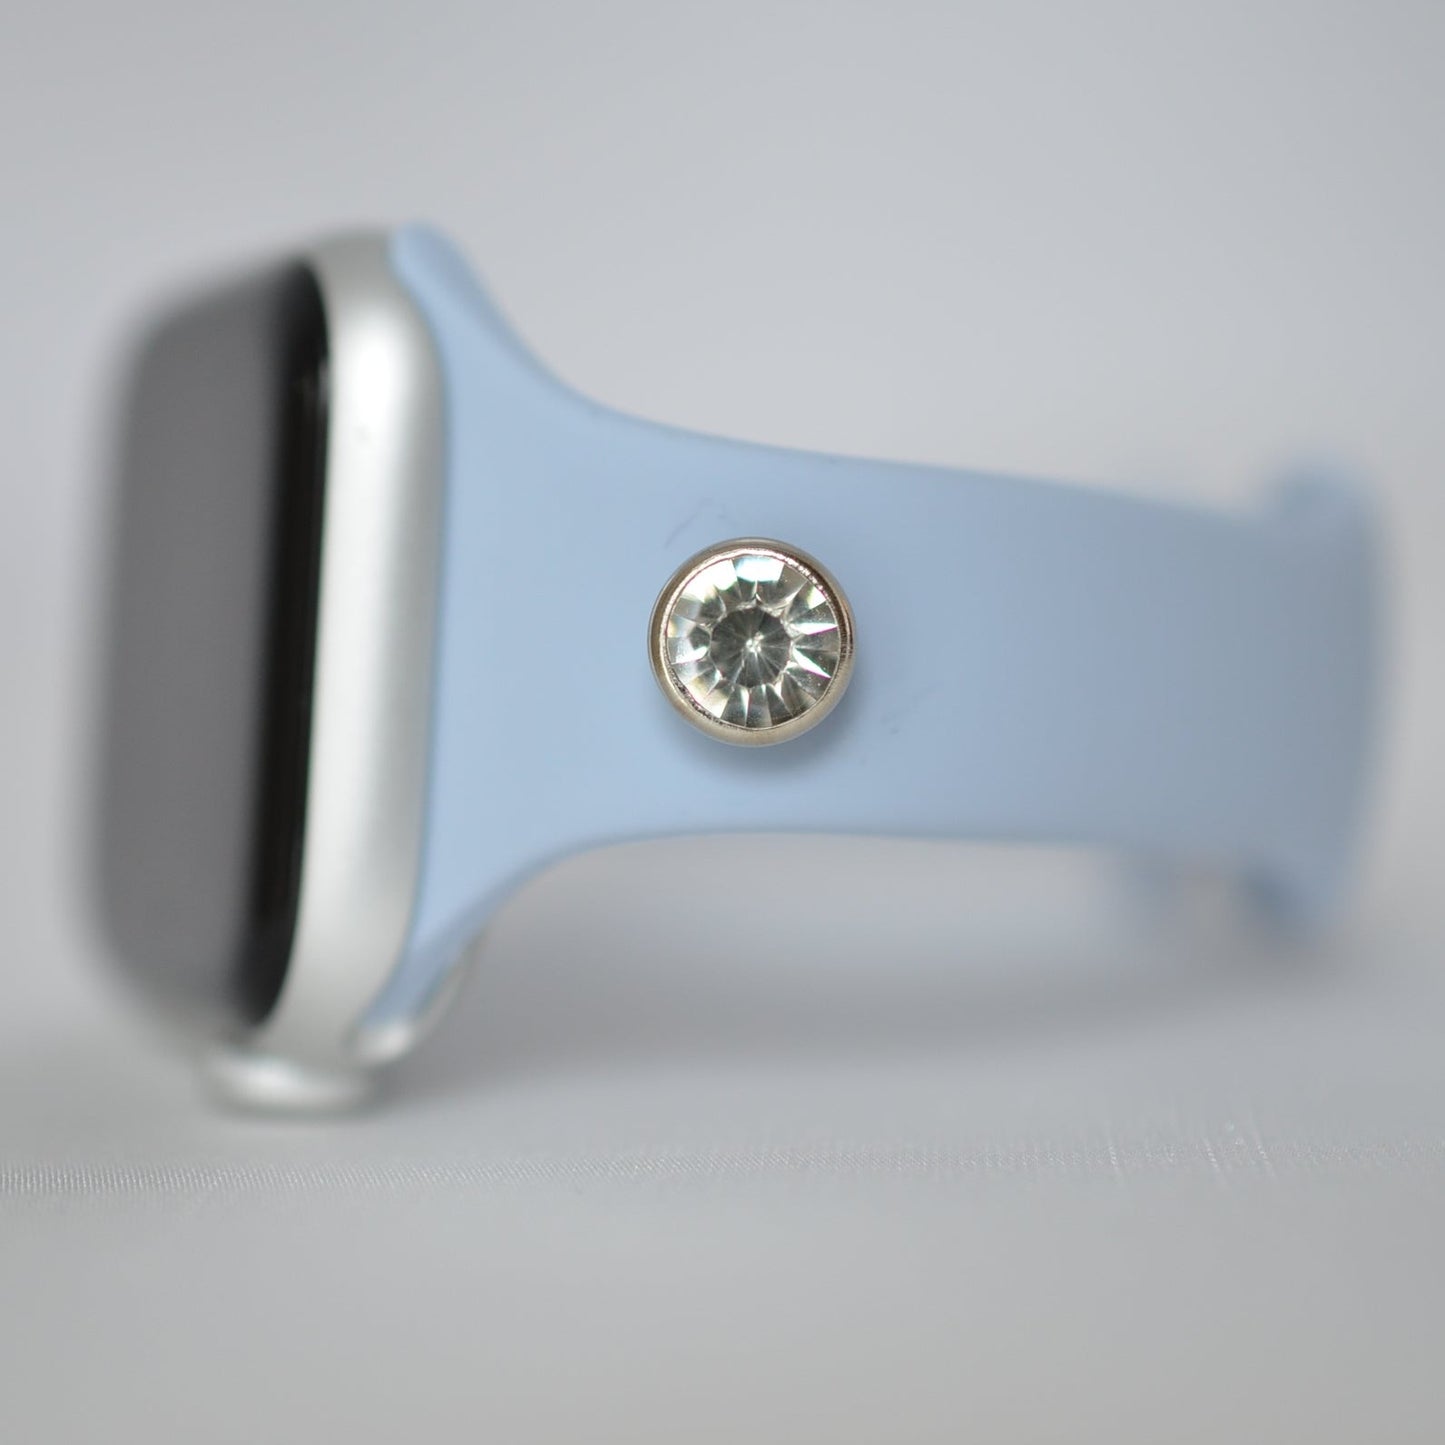 Light Blue Apple Watch Band with Charm 